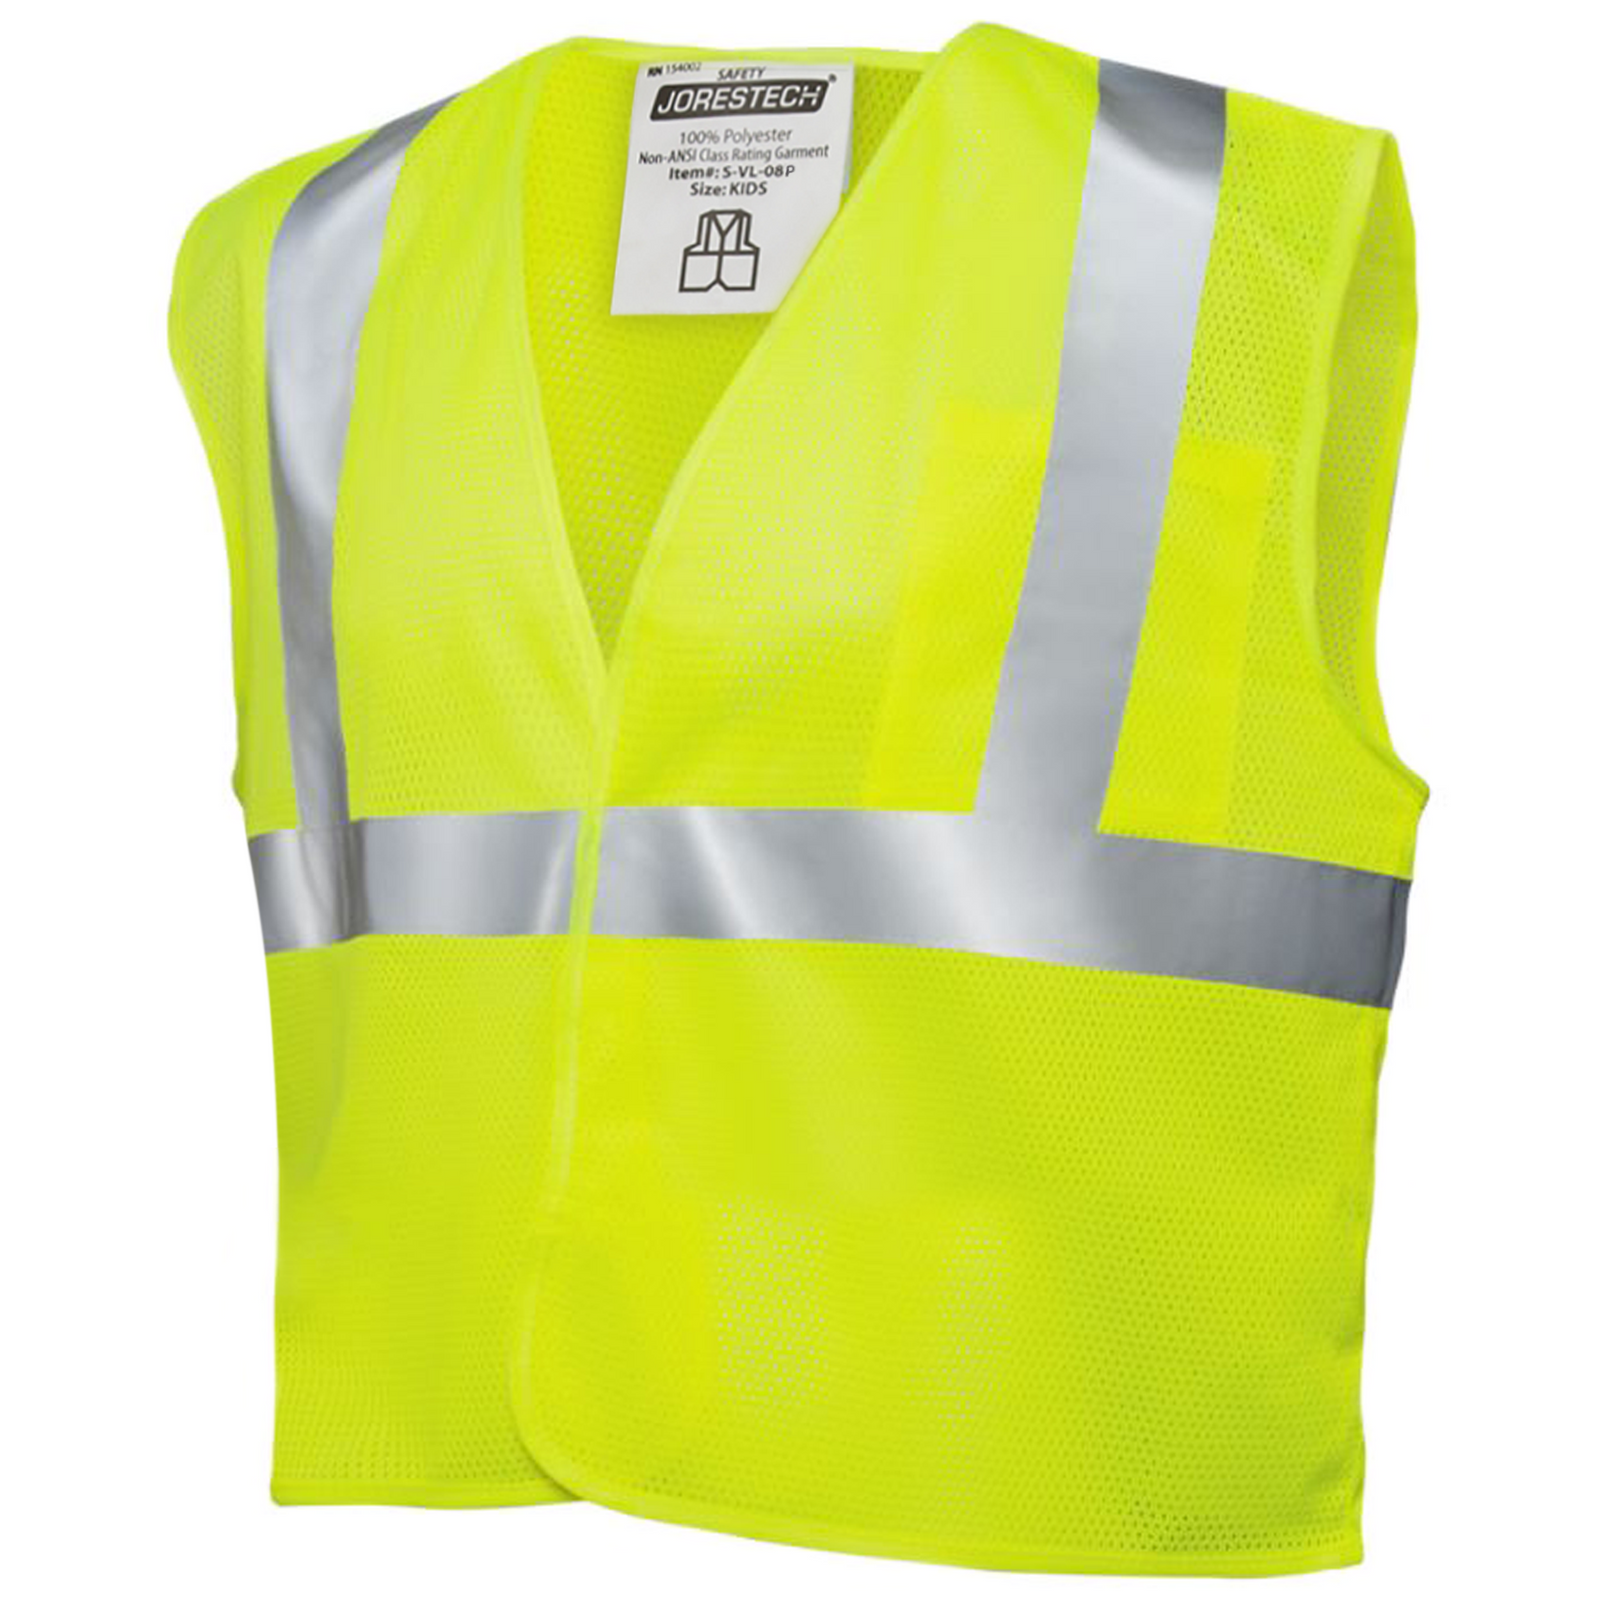 Children's lime safety vest with reflective strips.